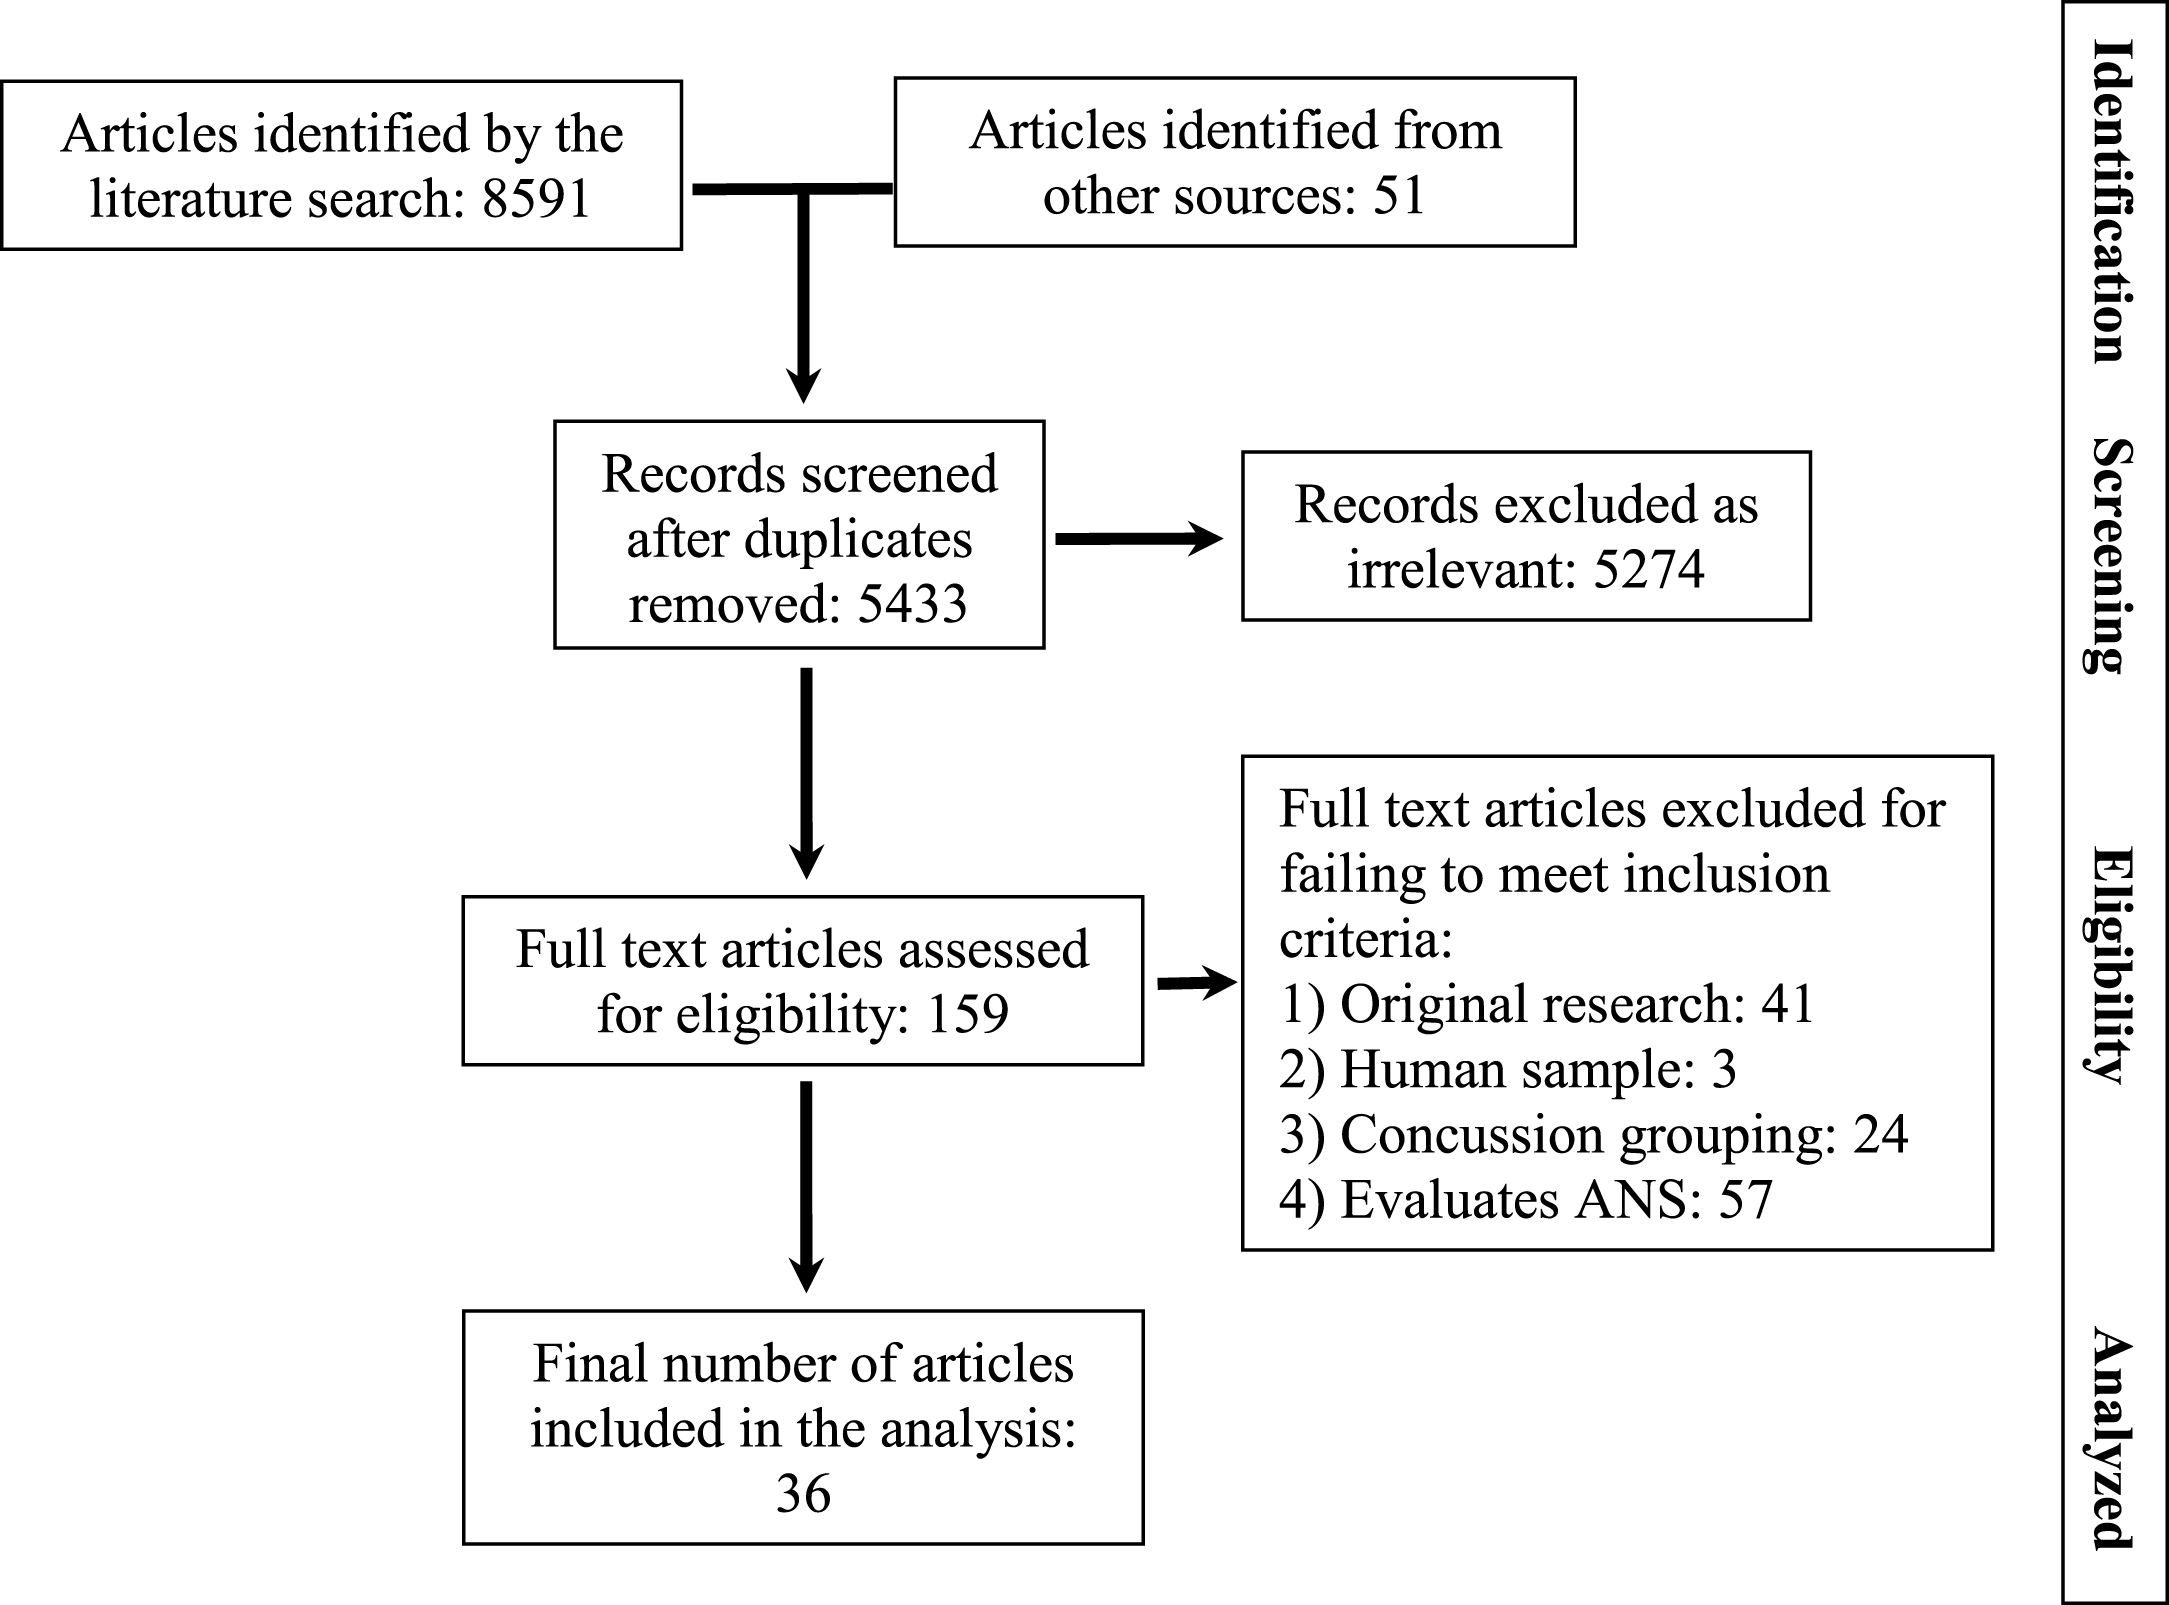 Flow diagram documenting disposition of articles during the systematic review.